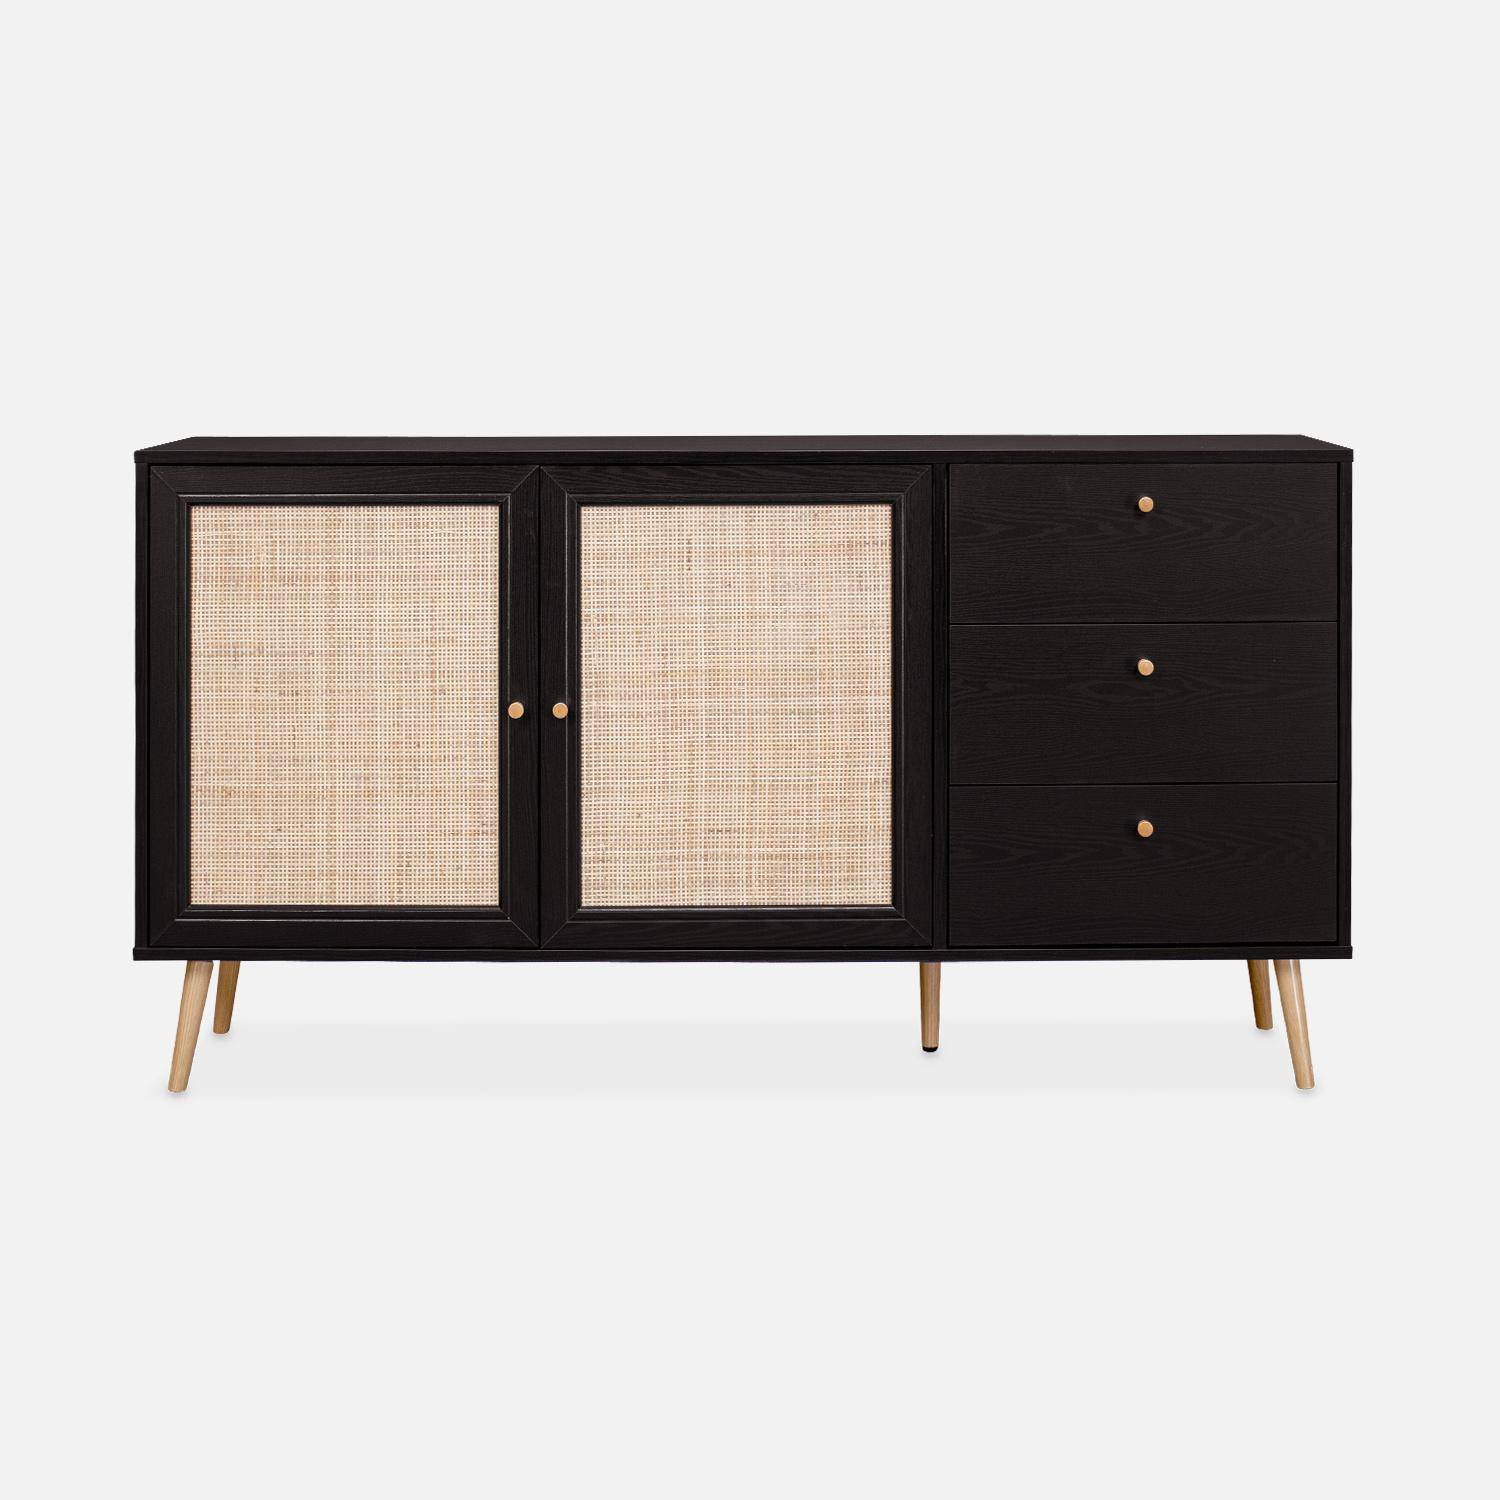 Wood and cane rattan detail sideboard, 2 doors & 3 drawers, Black , L150xW39xH79cm  Photo4